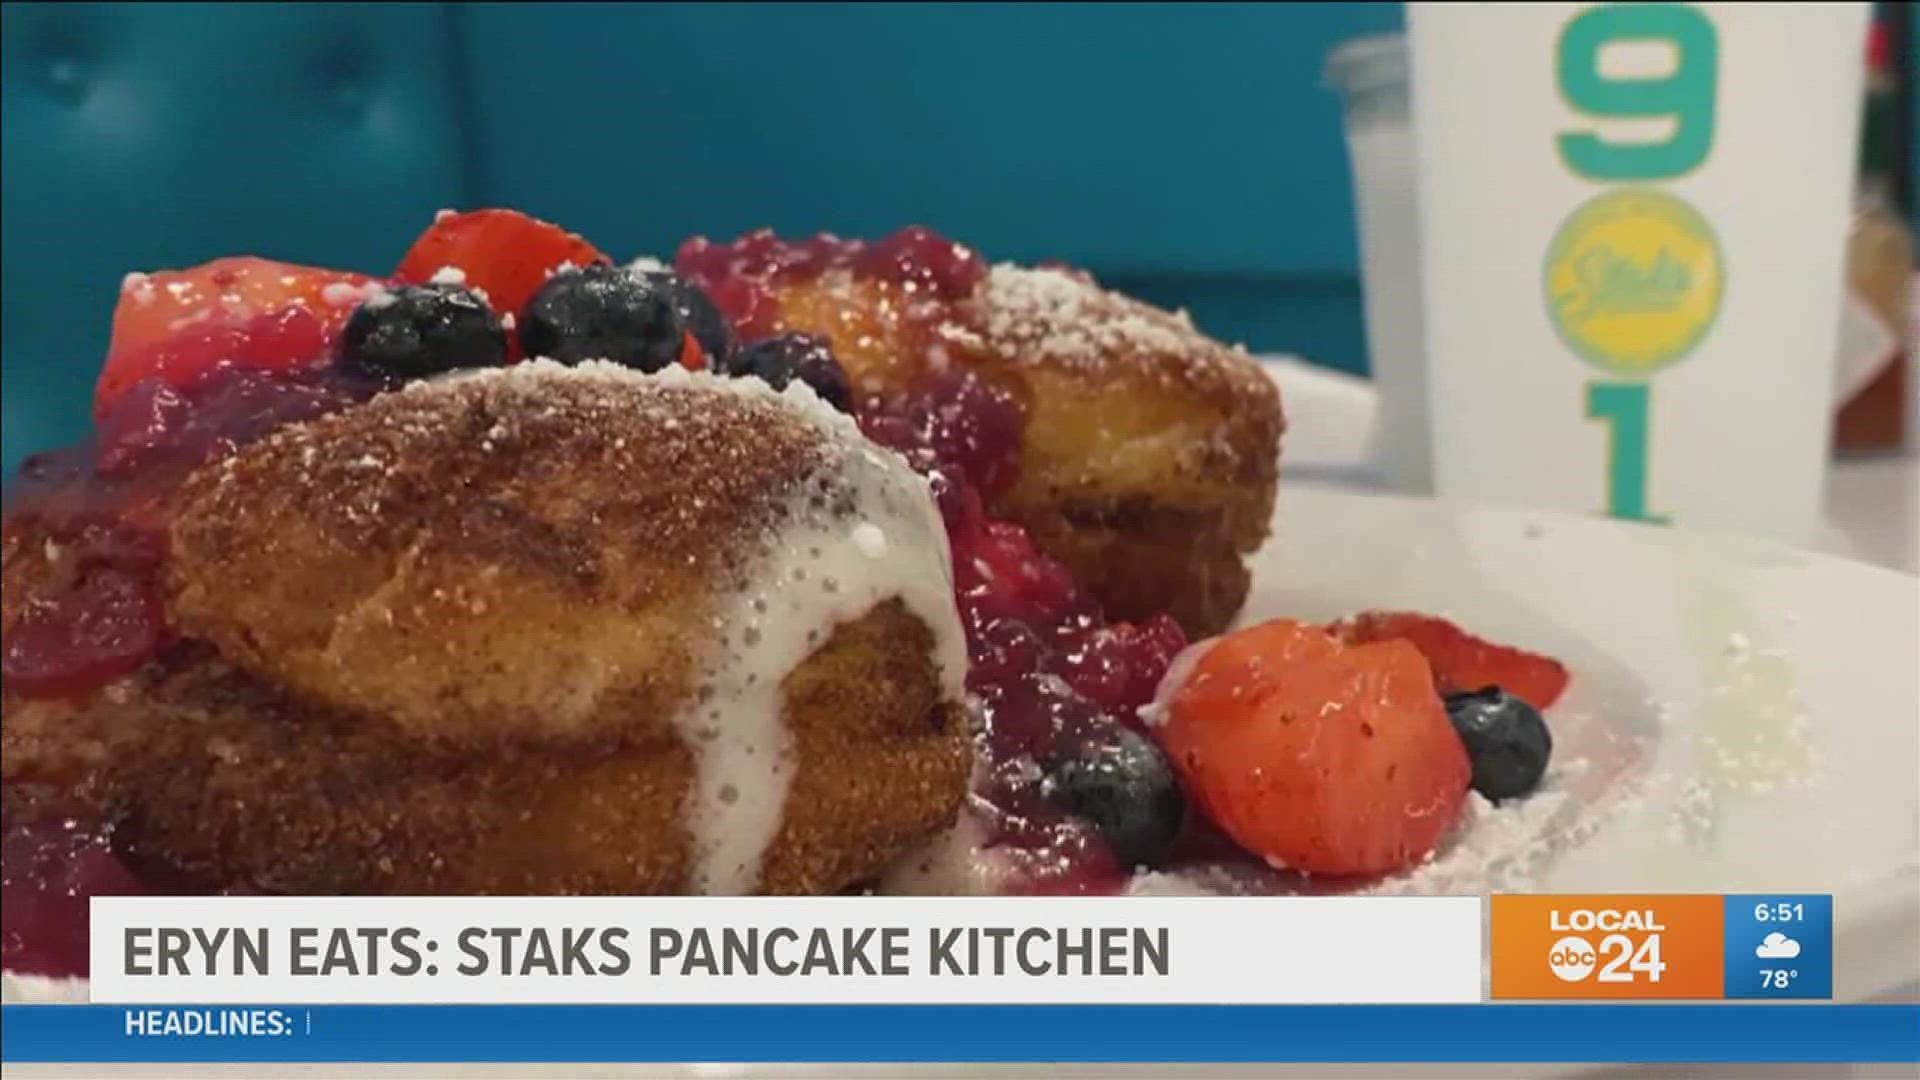 Local24 Anchor Eryn Rogers reviews Staks cinnamon pancakes, Trio tacos, and a soon-to-be added menu item that has not been named yet